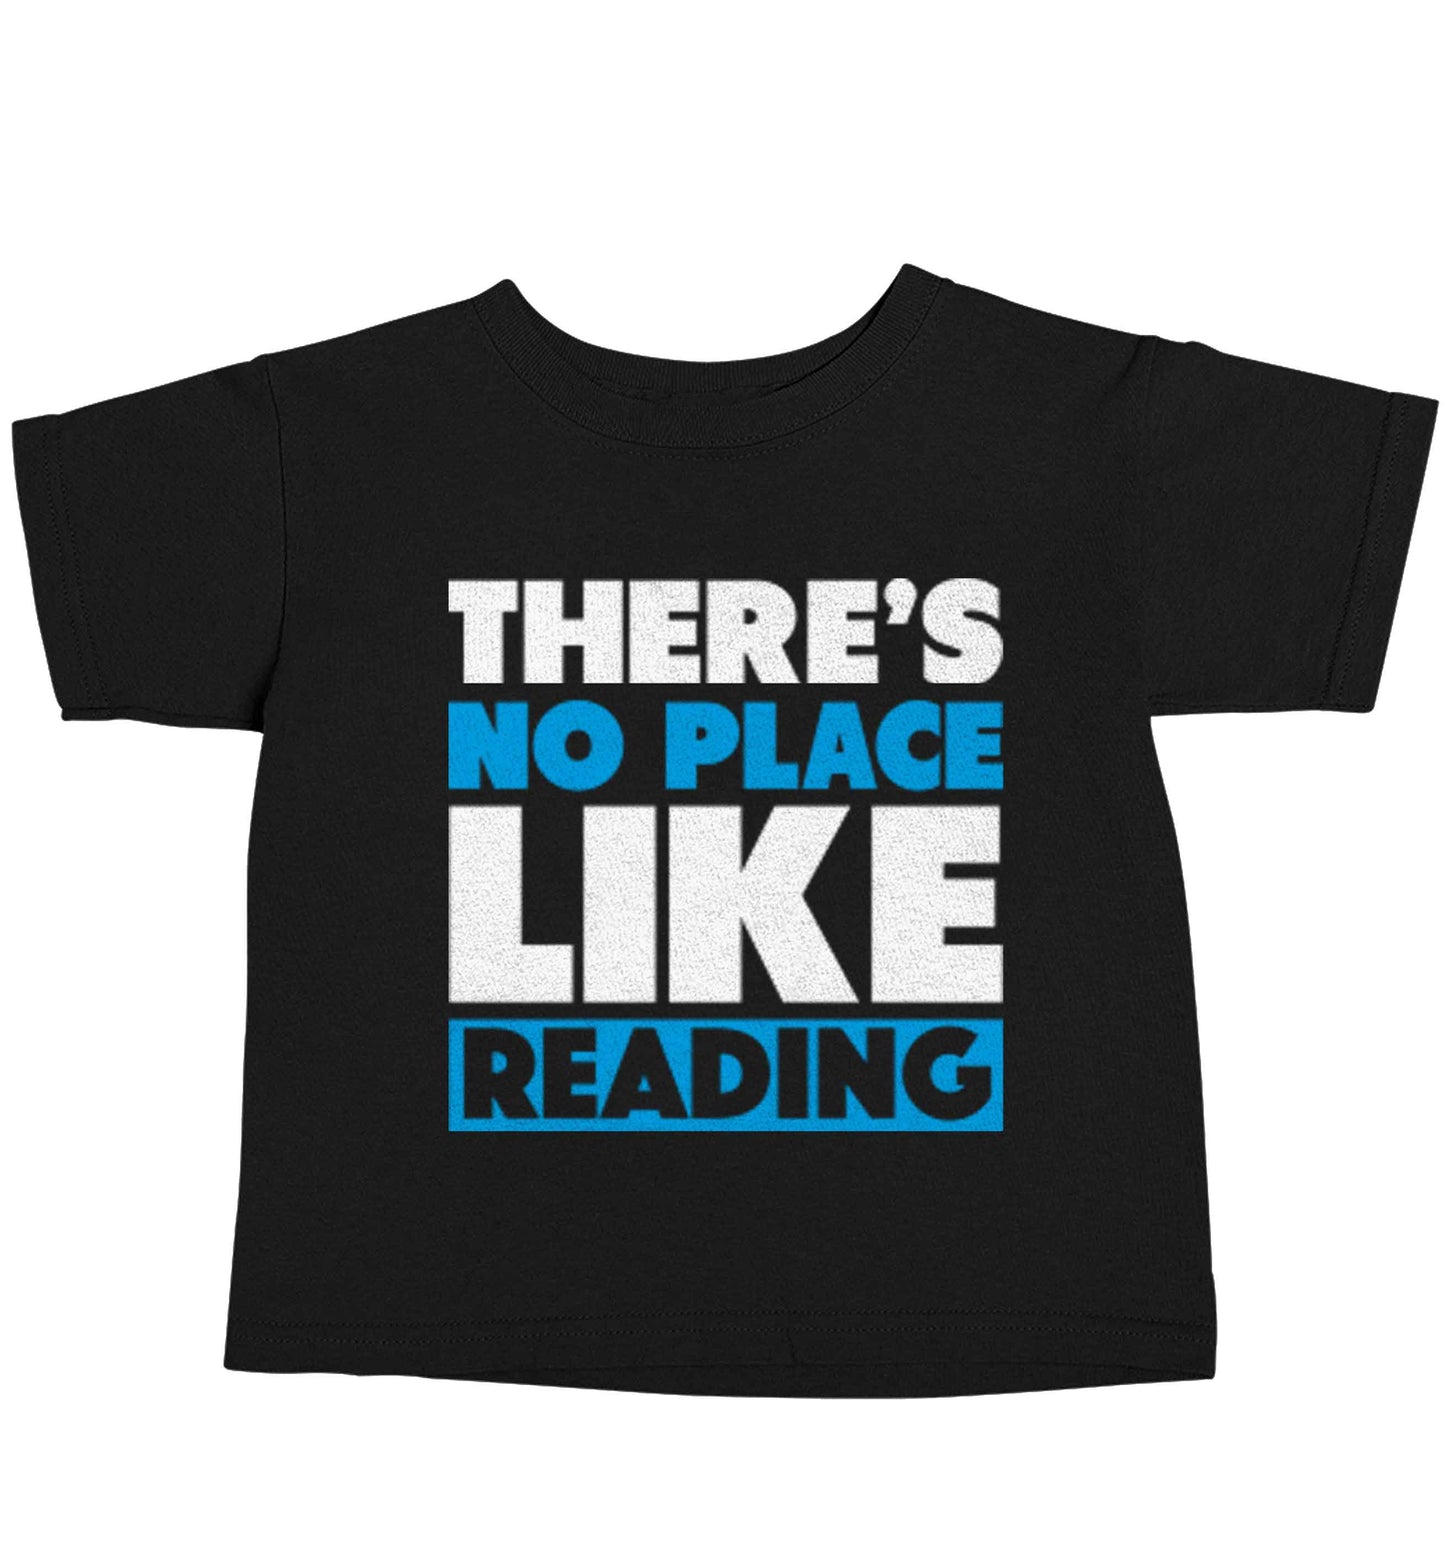 There's no place like ReadingBlack baby toddler Tshirt 2 years